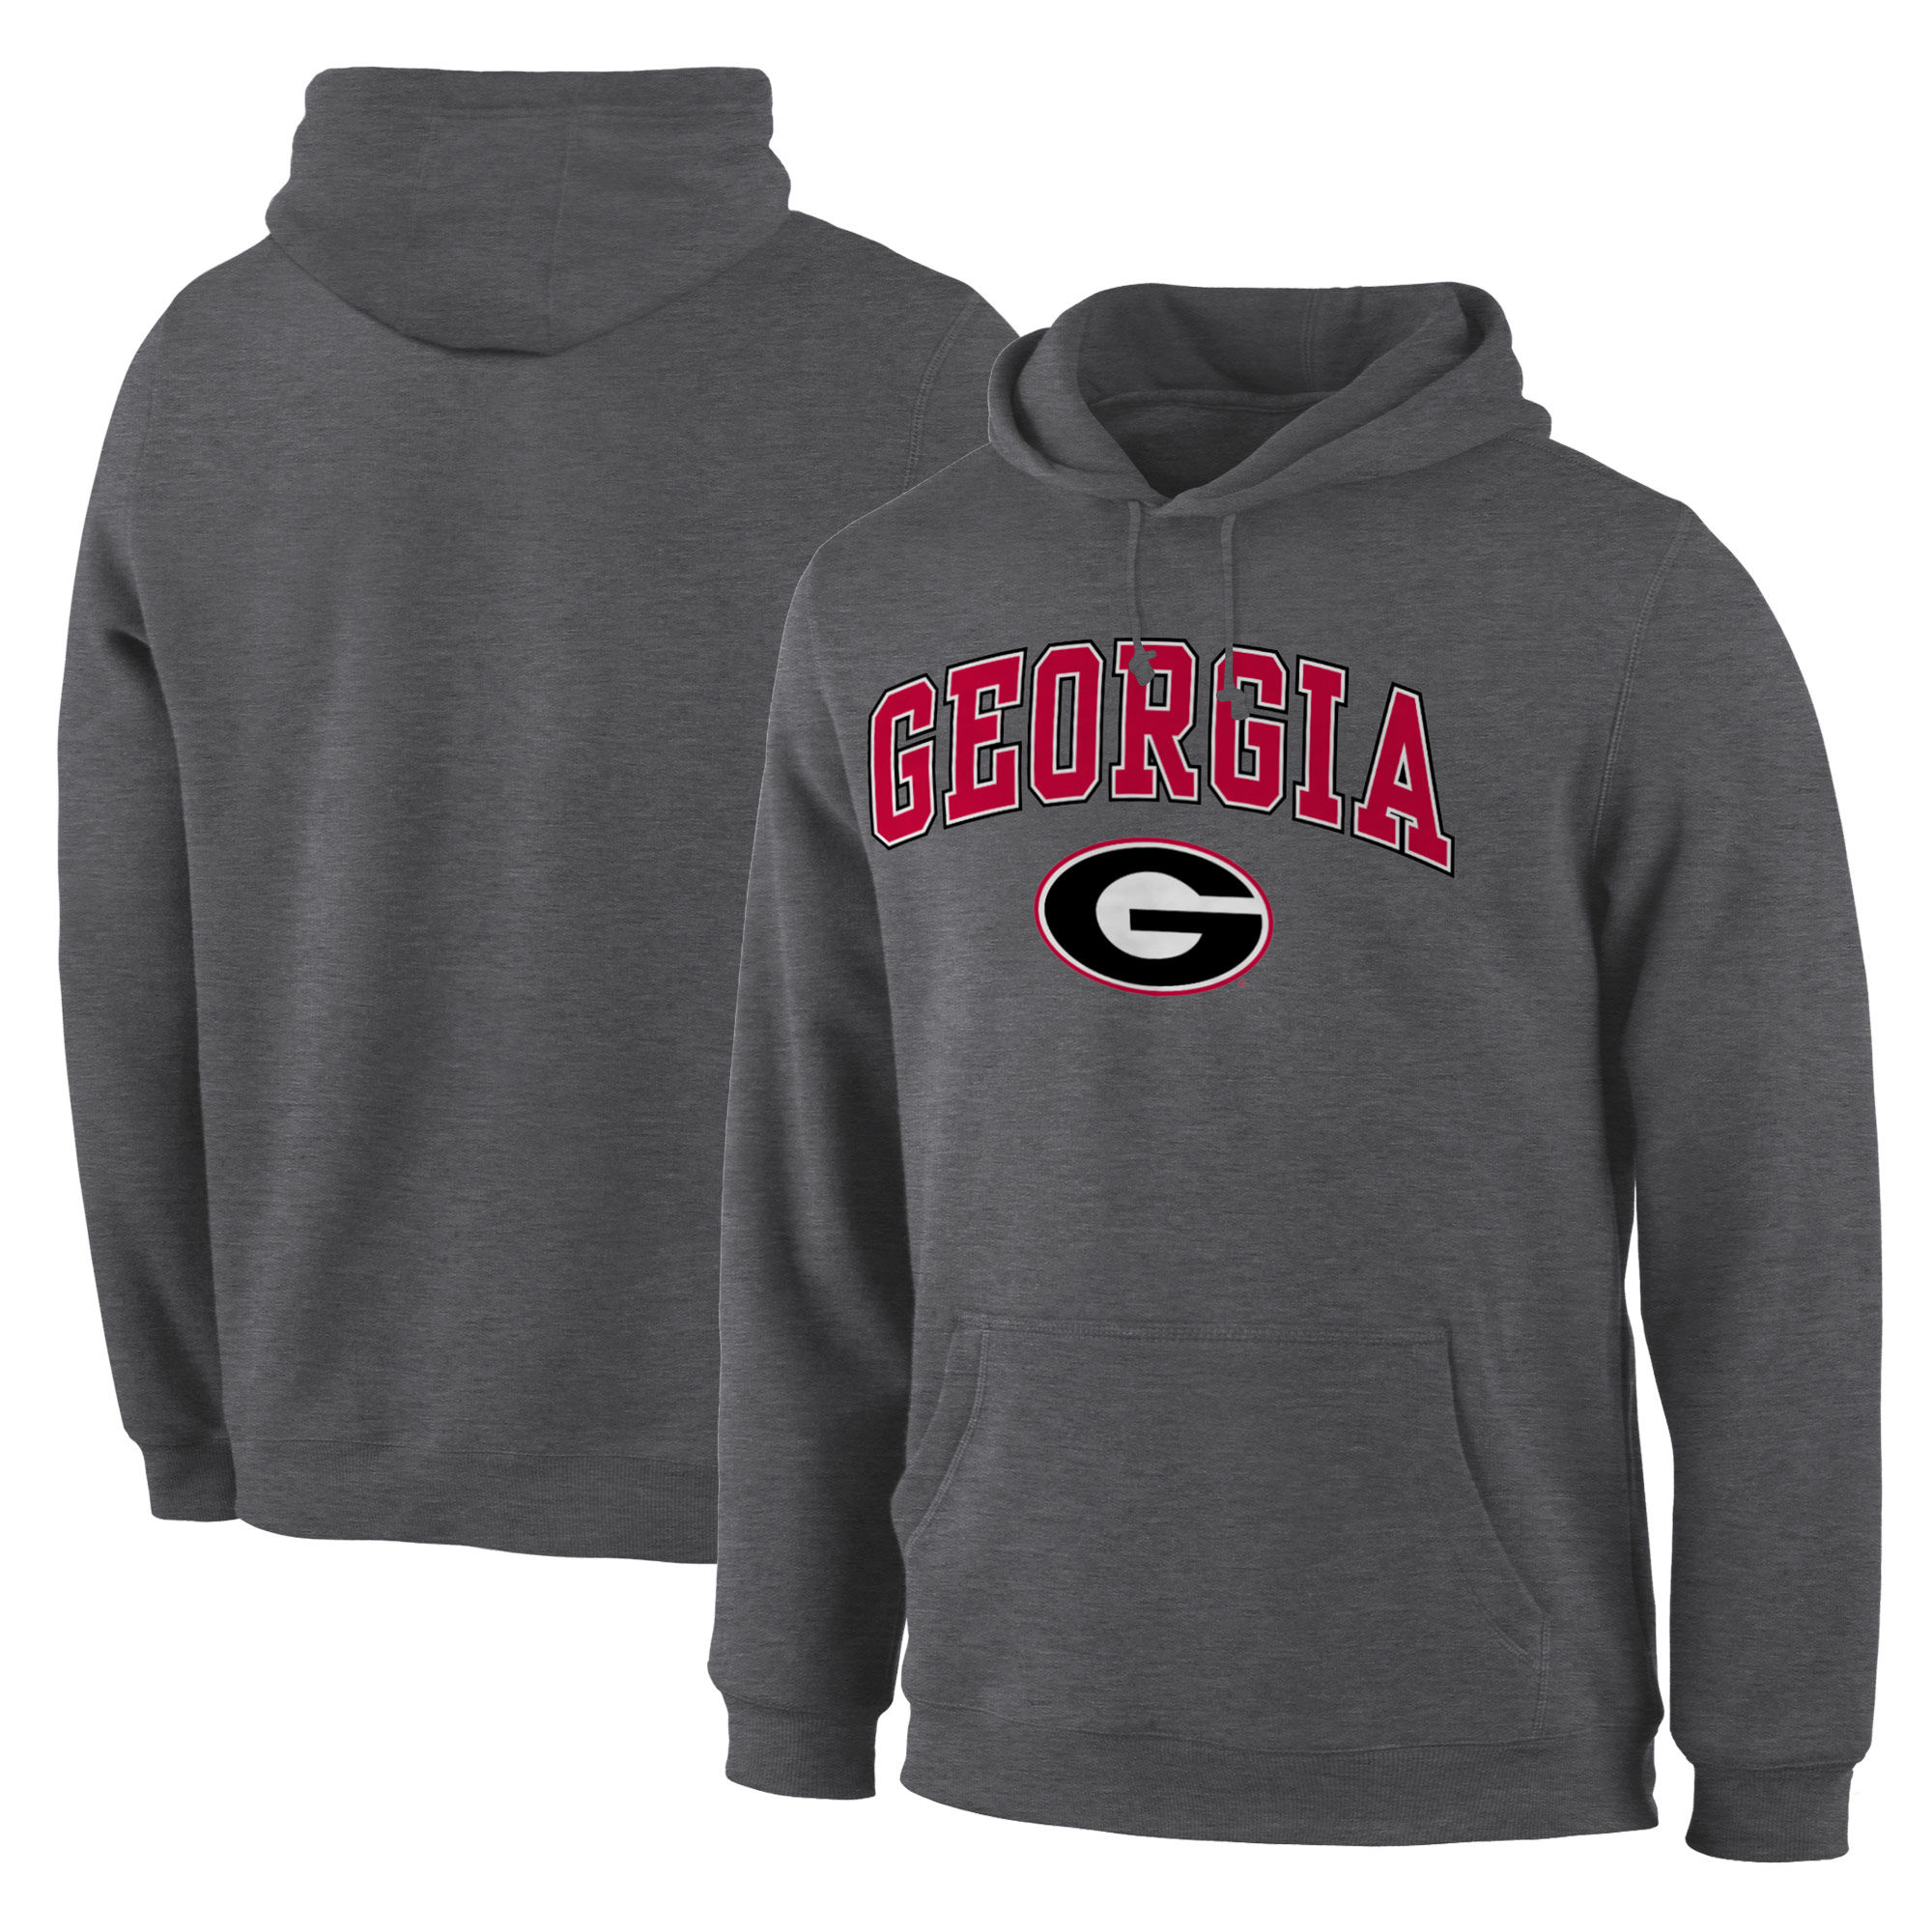 Georgia Bulldogs Charcoal Campus Pullover Hoodie